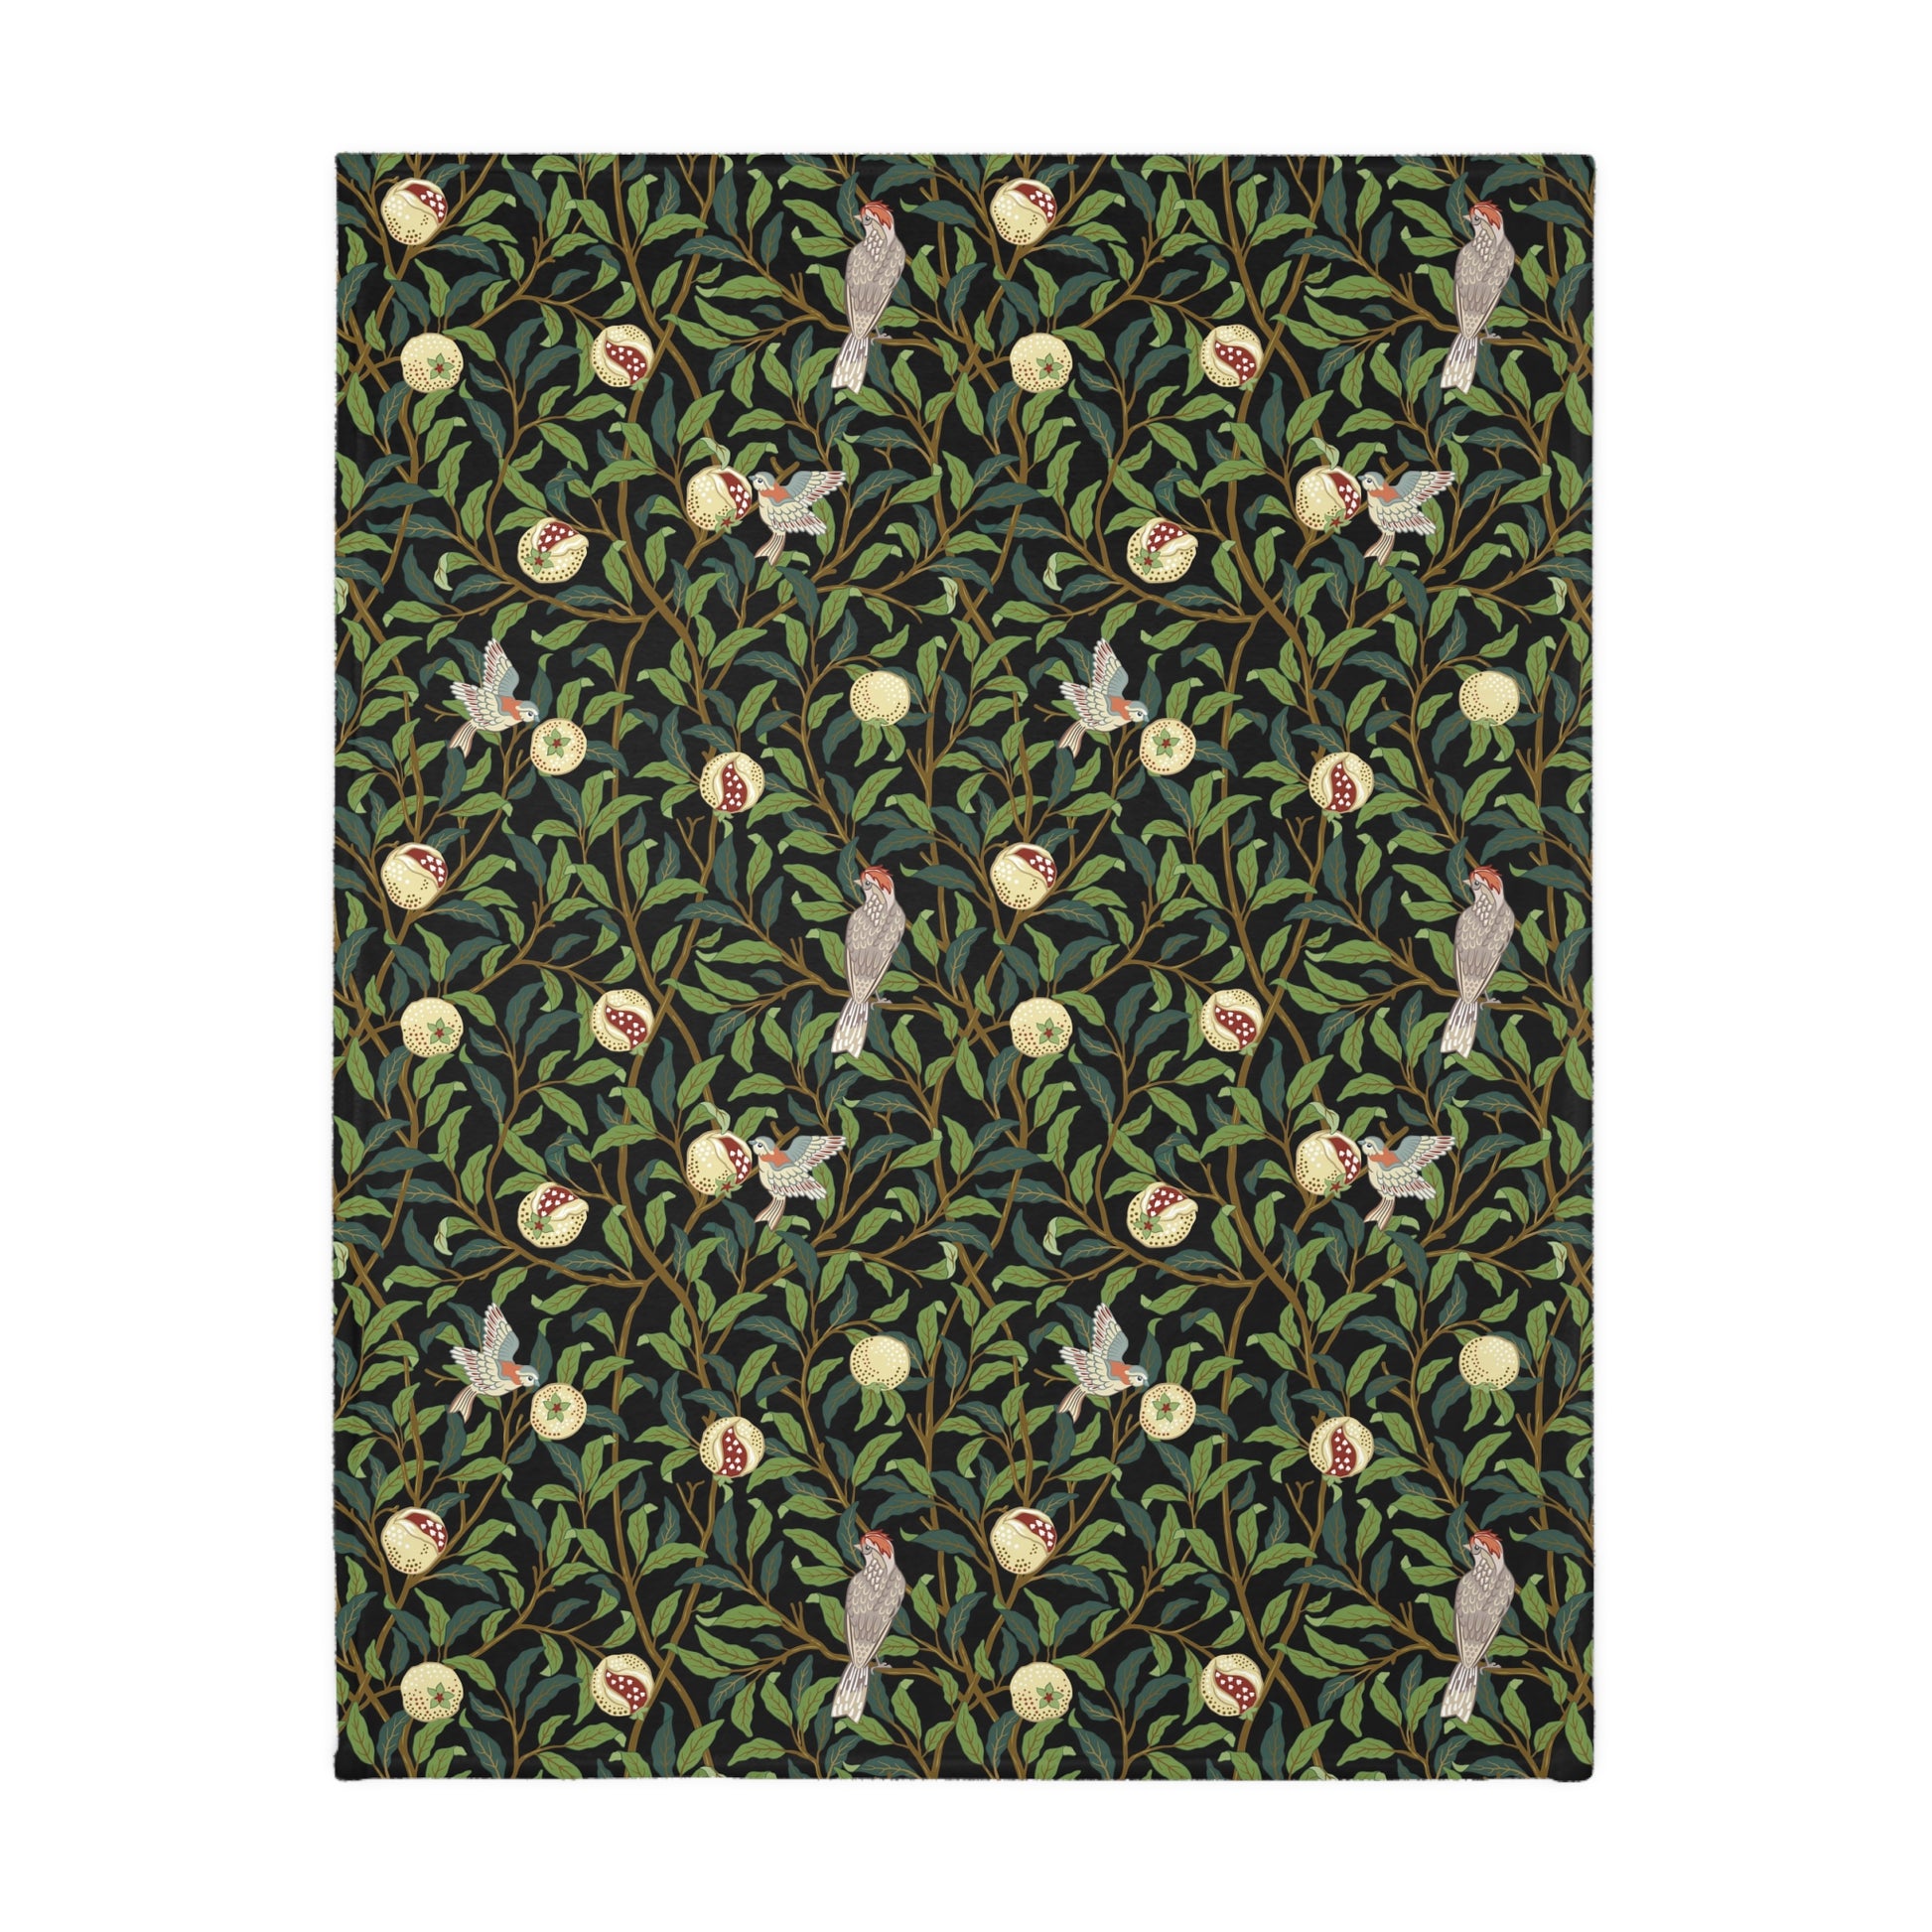 william-morris-co-luxury-velveteen-minky-blanket-two-sided-print-bird-and-pomegranate-collection-tiffany-blue-onyx-7